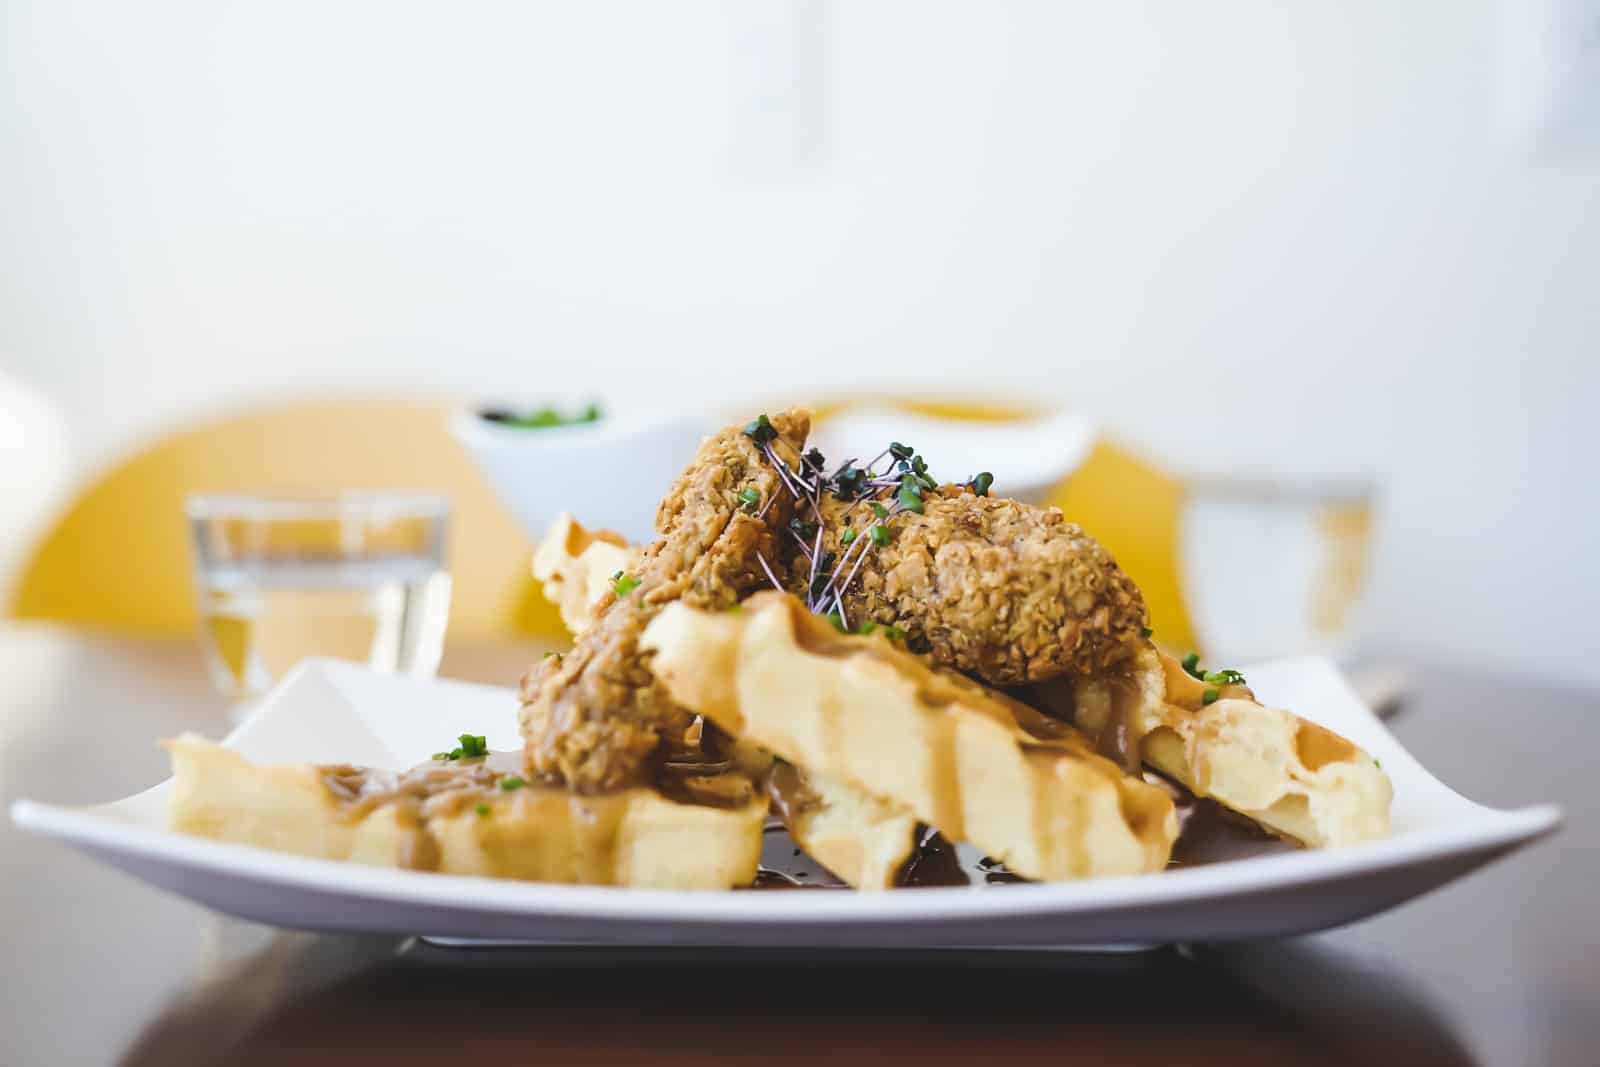 These five restaurants in Calgary serve up some of the best and most comforting vegan/plant-based meals in Alberta.